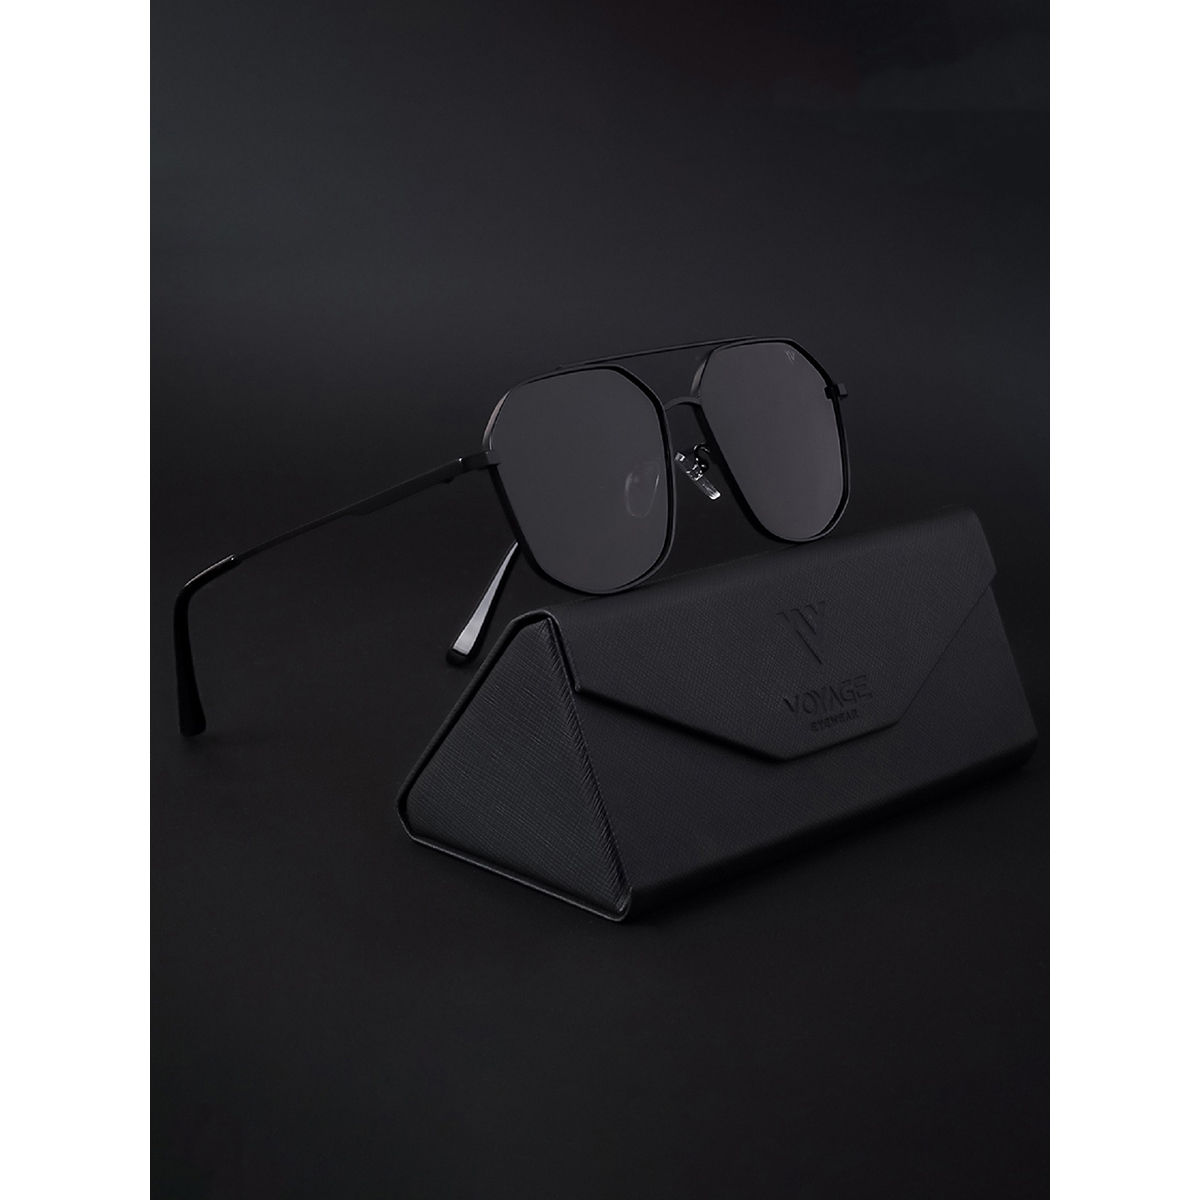 Voyage Unisex Square Sunglasses 8926MG2779 Price in India, Full  Specifications & Offers | DTashion.com